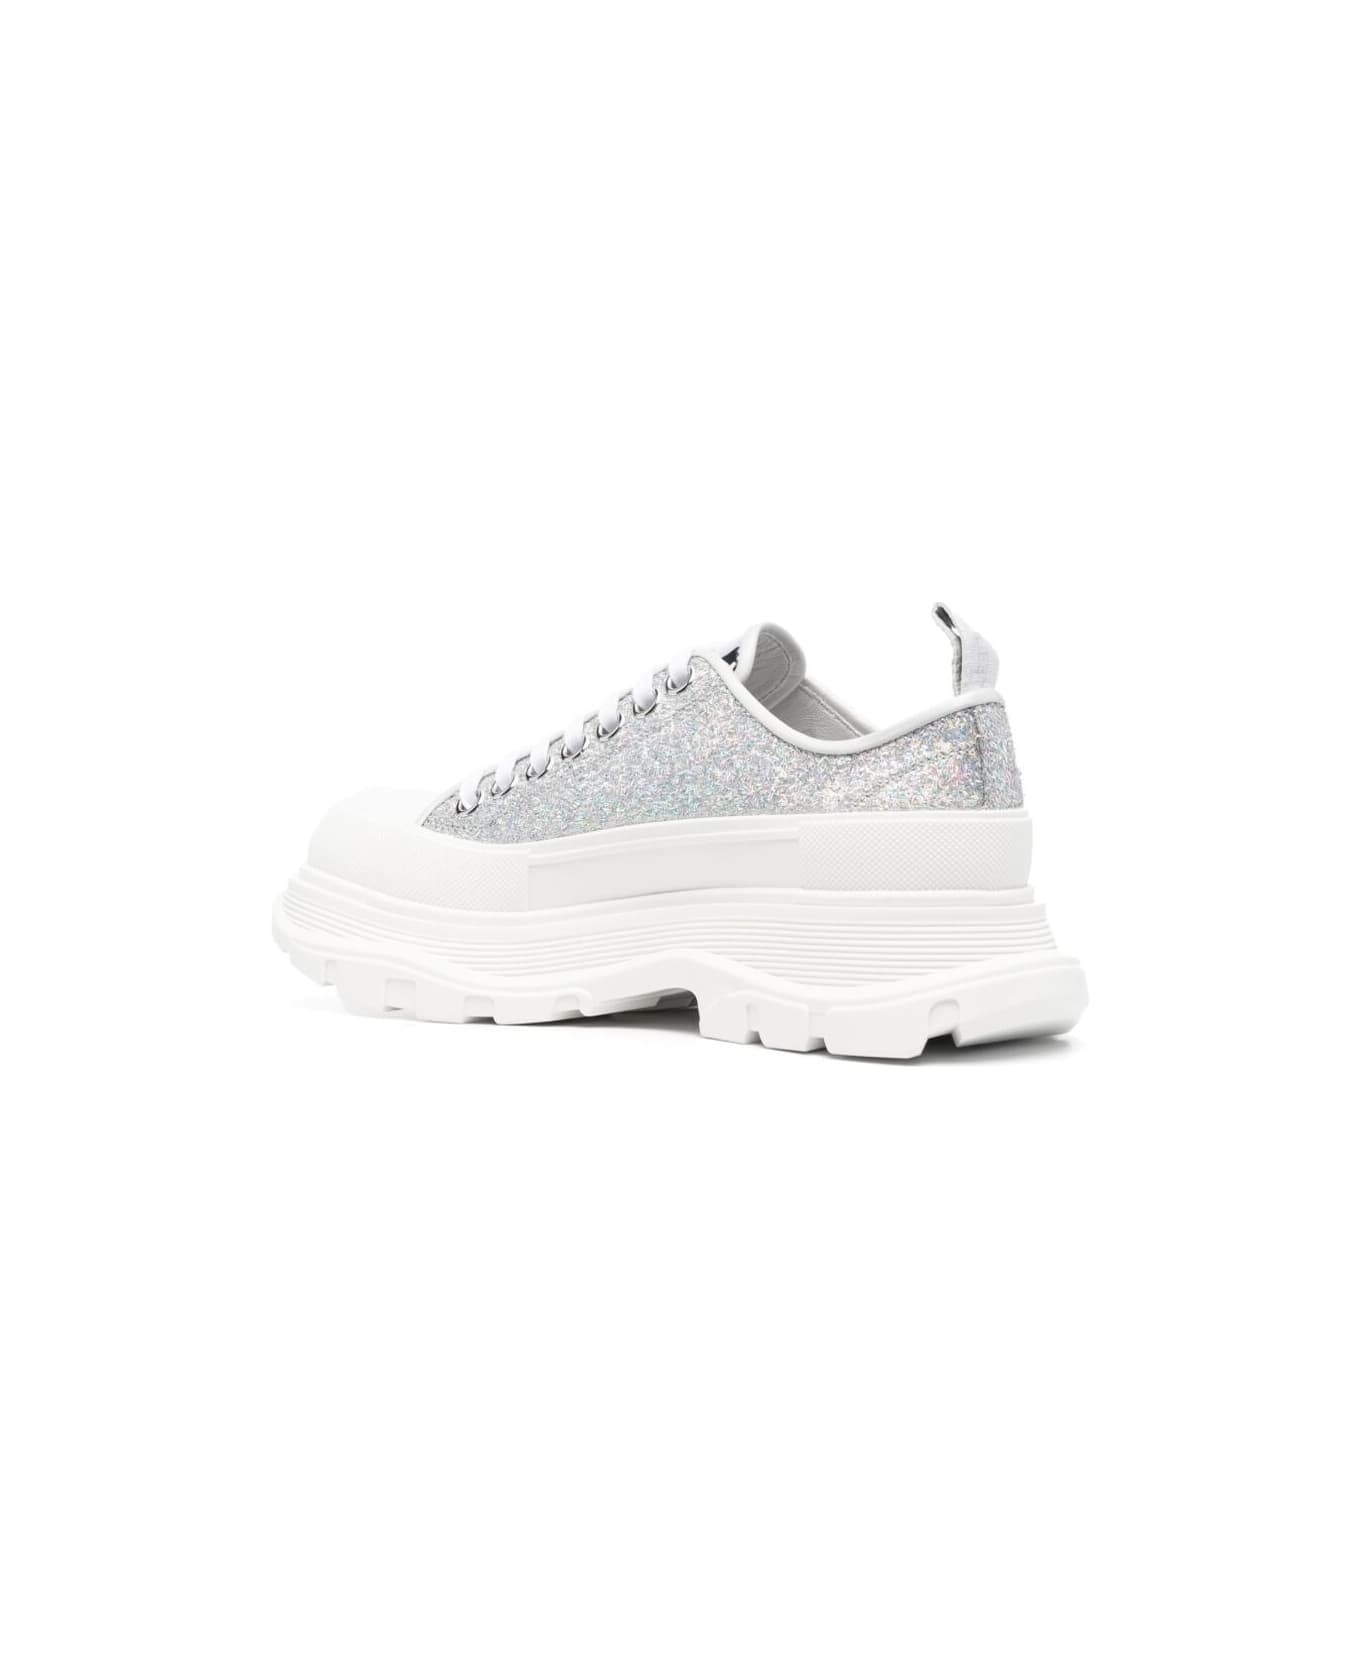 Alexander McQueen 'tread Slick' White And Silver Sneakers With Oversized Platform And All-over Glitters In Cotton Woman - Metallic